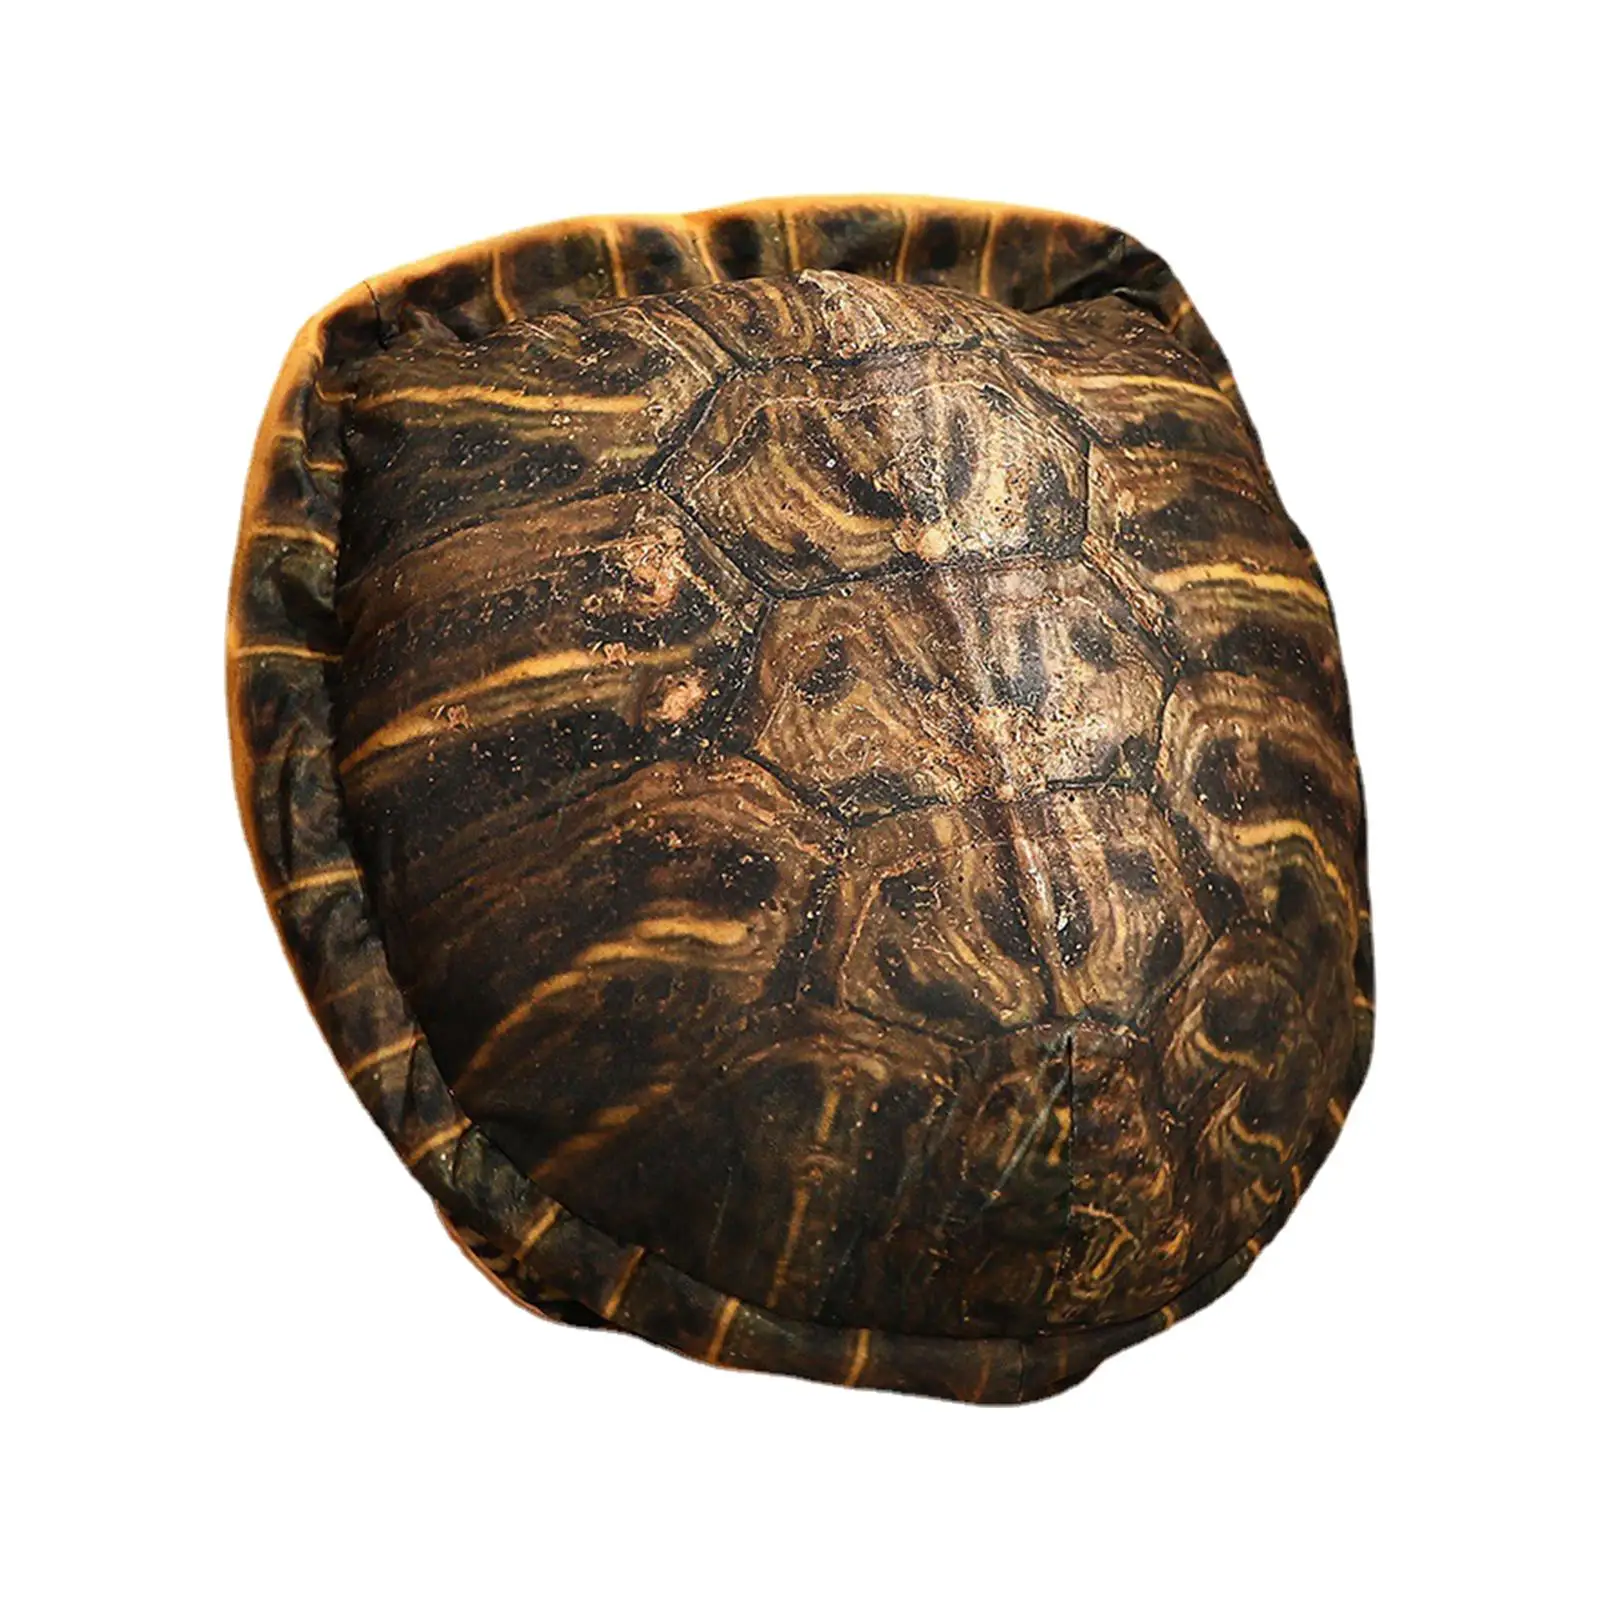 Creative Stuffed Animal Costume Pretend Play Birthday Gift Plush Toy Wearable Turtle Shell Pillows for Bedroom Adults Office